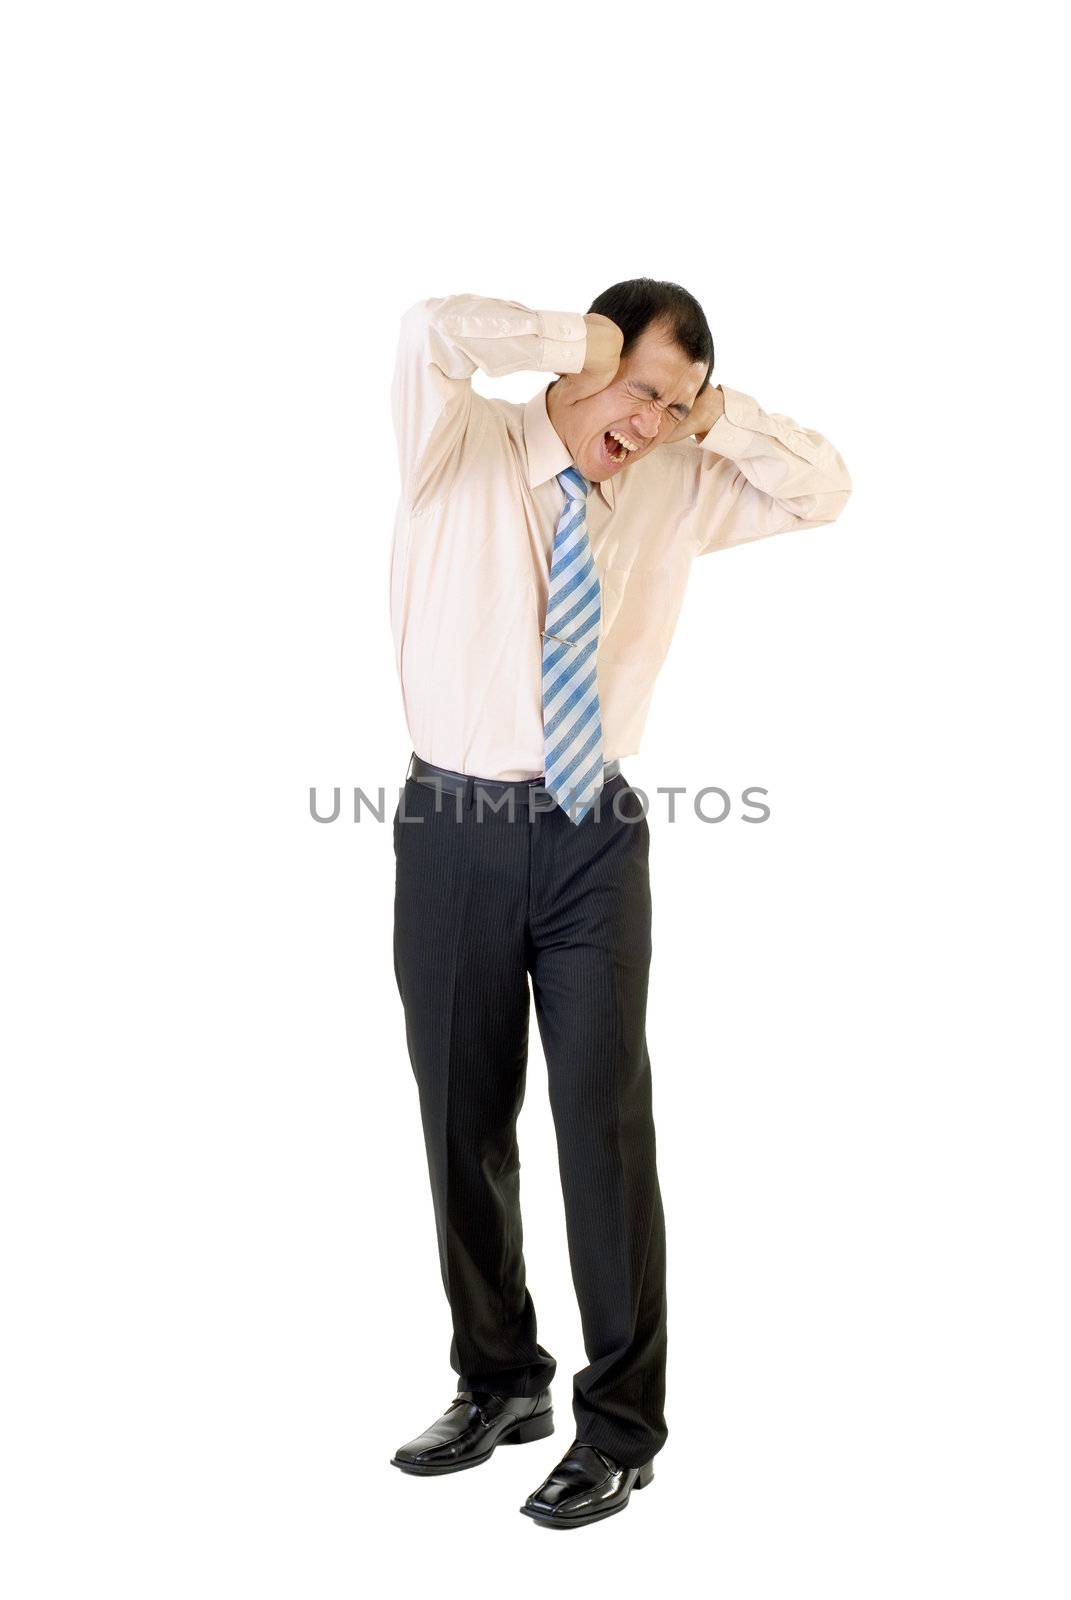 Unhappy businessman of Asian under stress standing on white background.